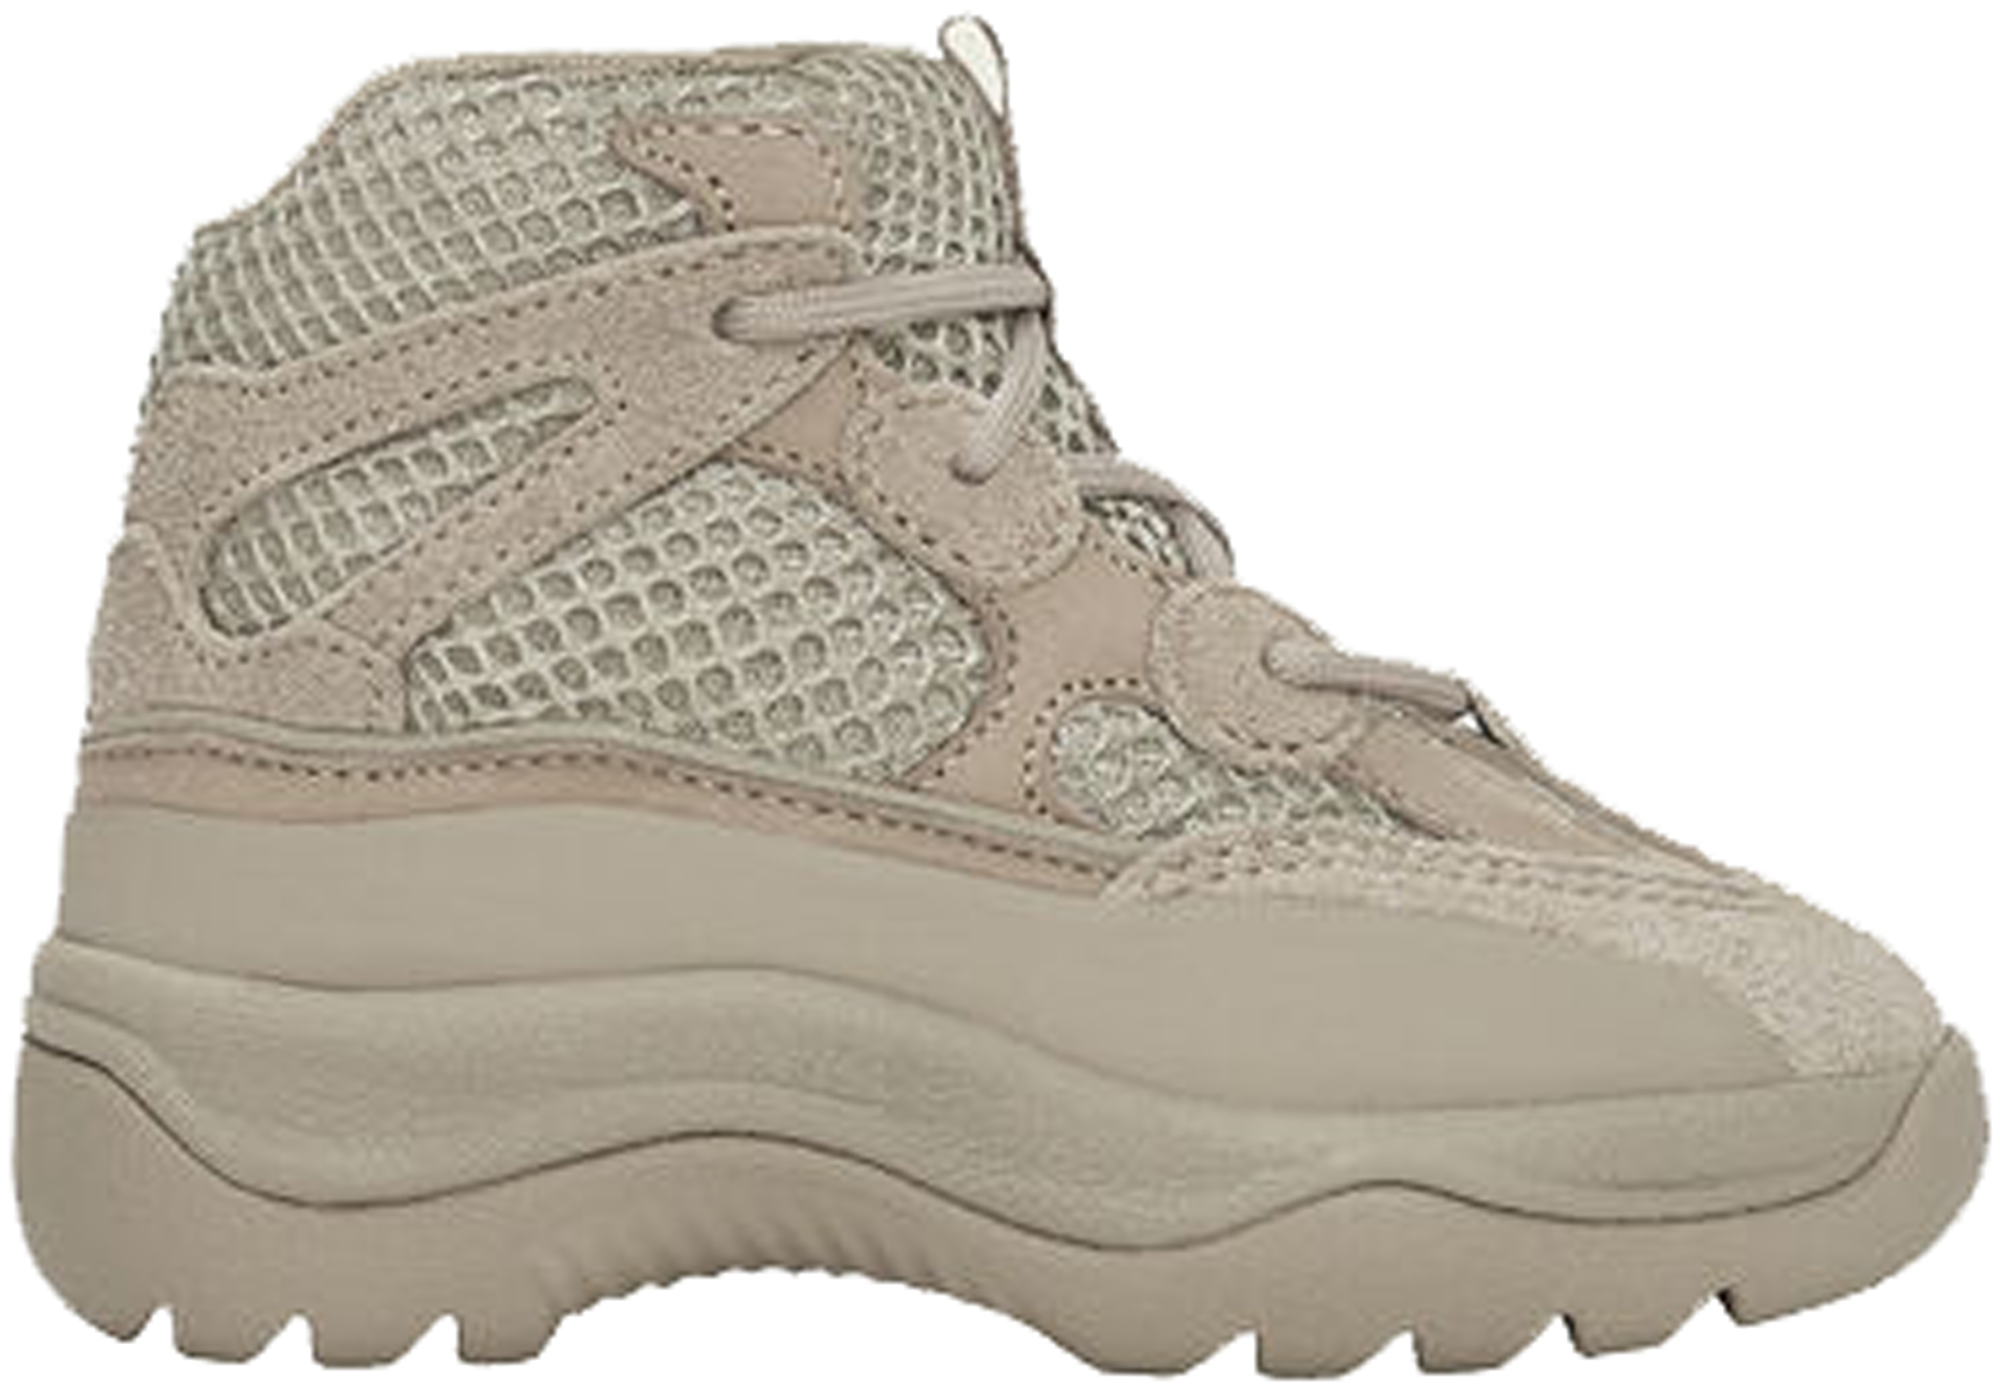 yeezy boots for toddlers